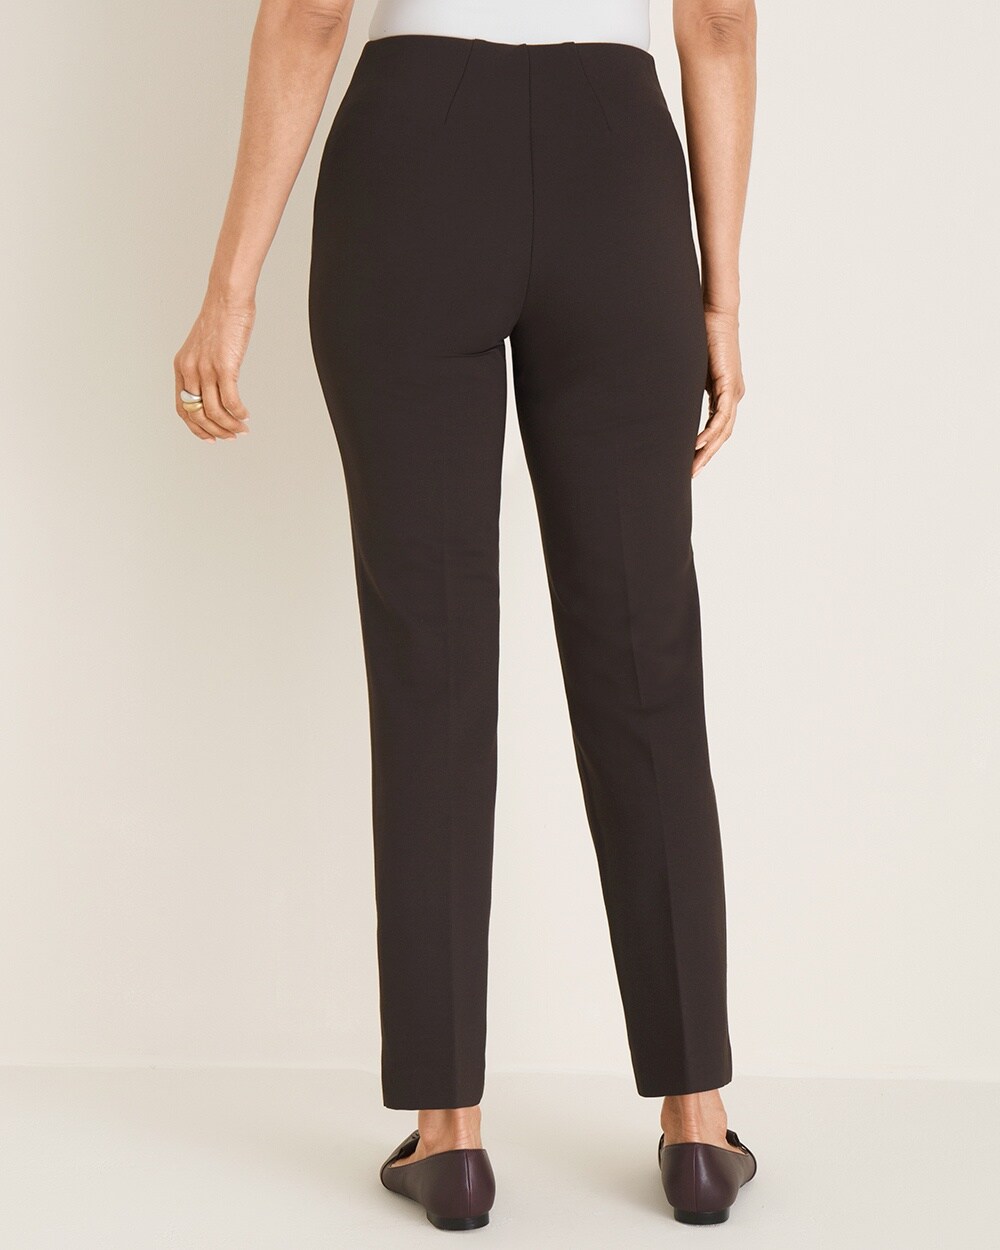 So Slimming Juliet Side-Vent Ankle Pants - Chico's